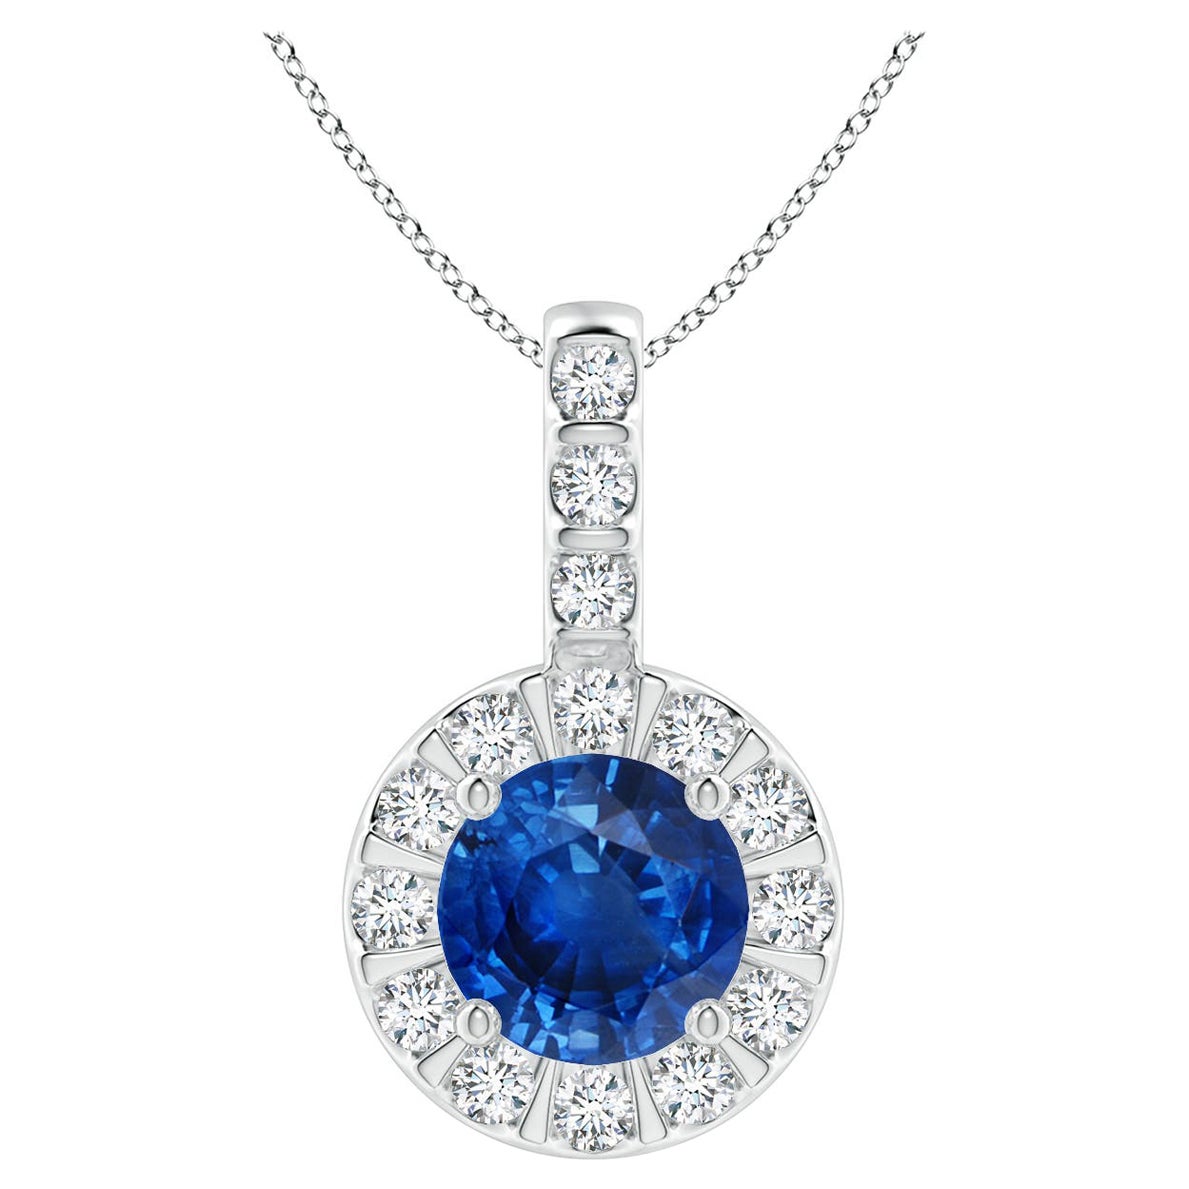 ANGARA Natural 1ct Blue Sapphire Pendant with Diamond Halo in 14K White Gold